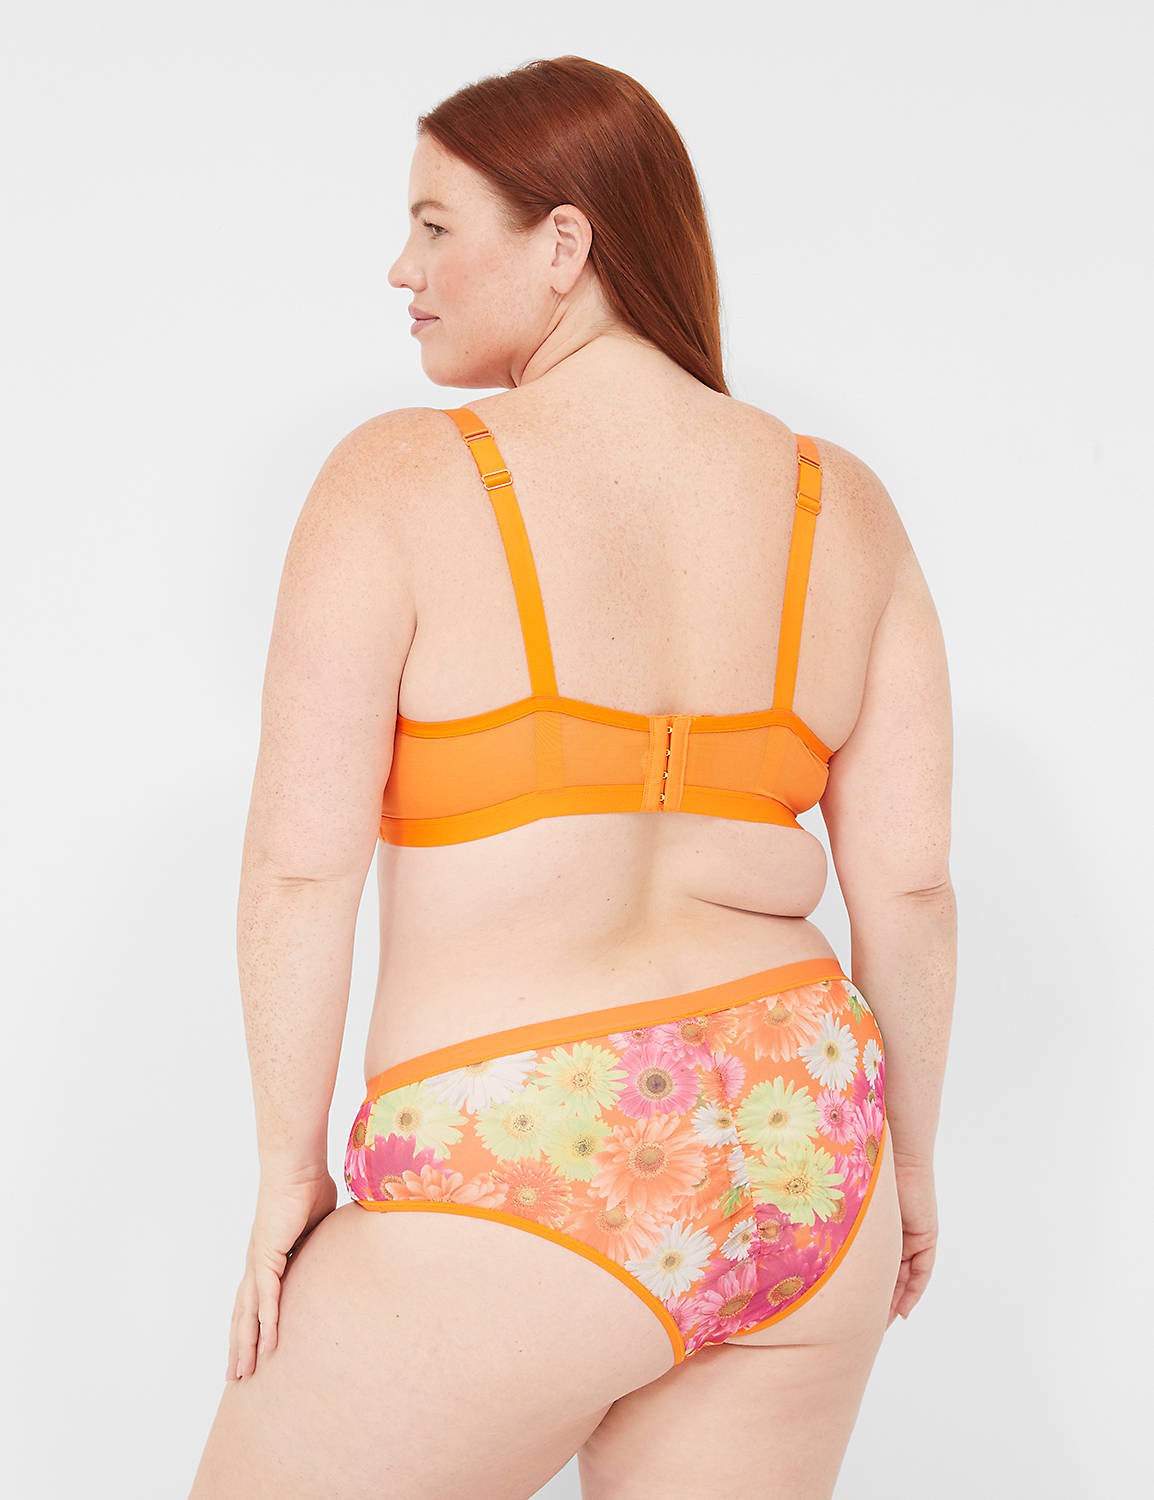 Mesh Ruched Back Cheeky 1140059 S Product Image 2